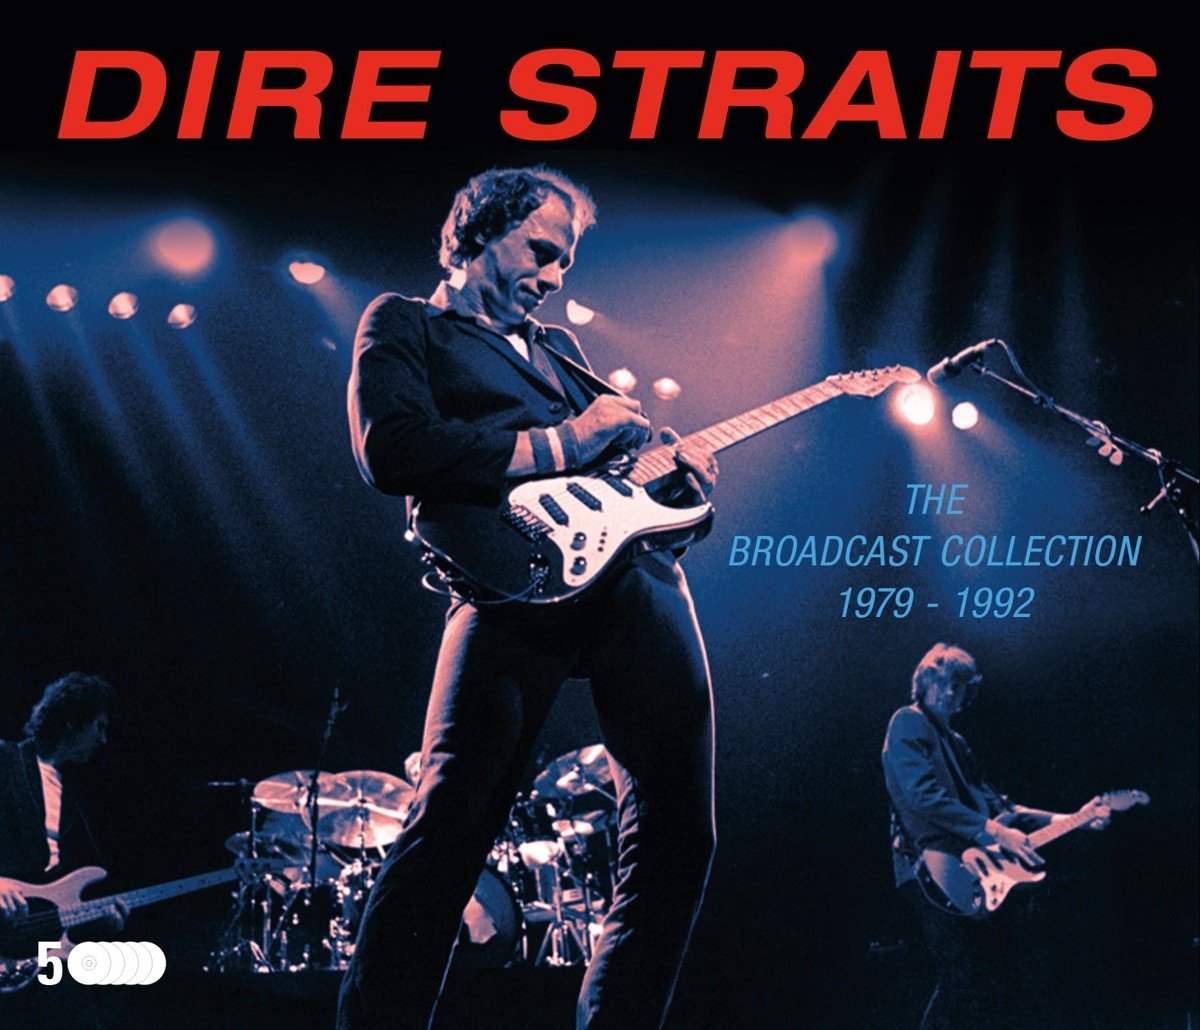 Dire Straits - The Broadcast Collection 1979-1992 (5 CD) - Dire Straits